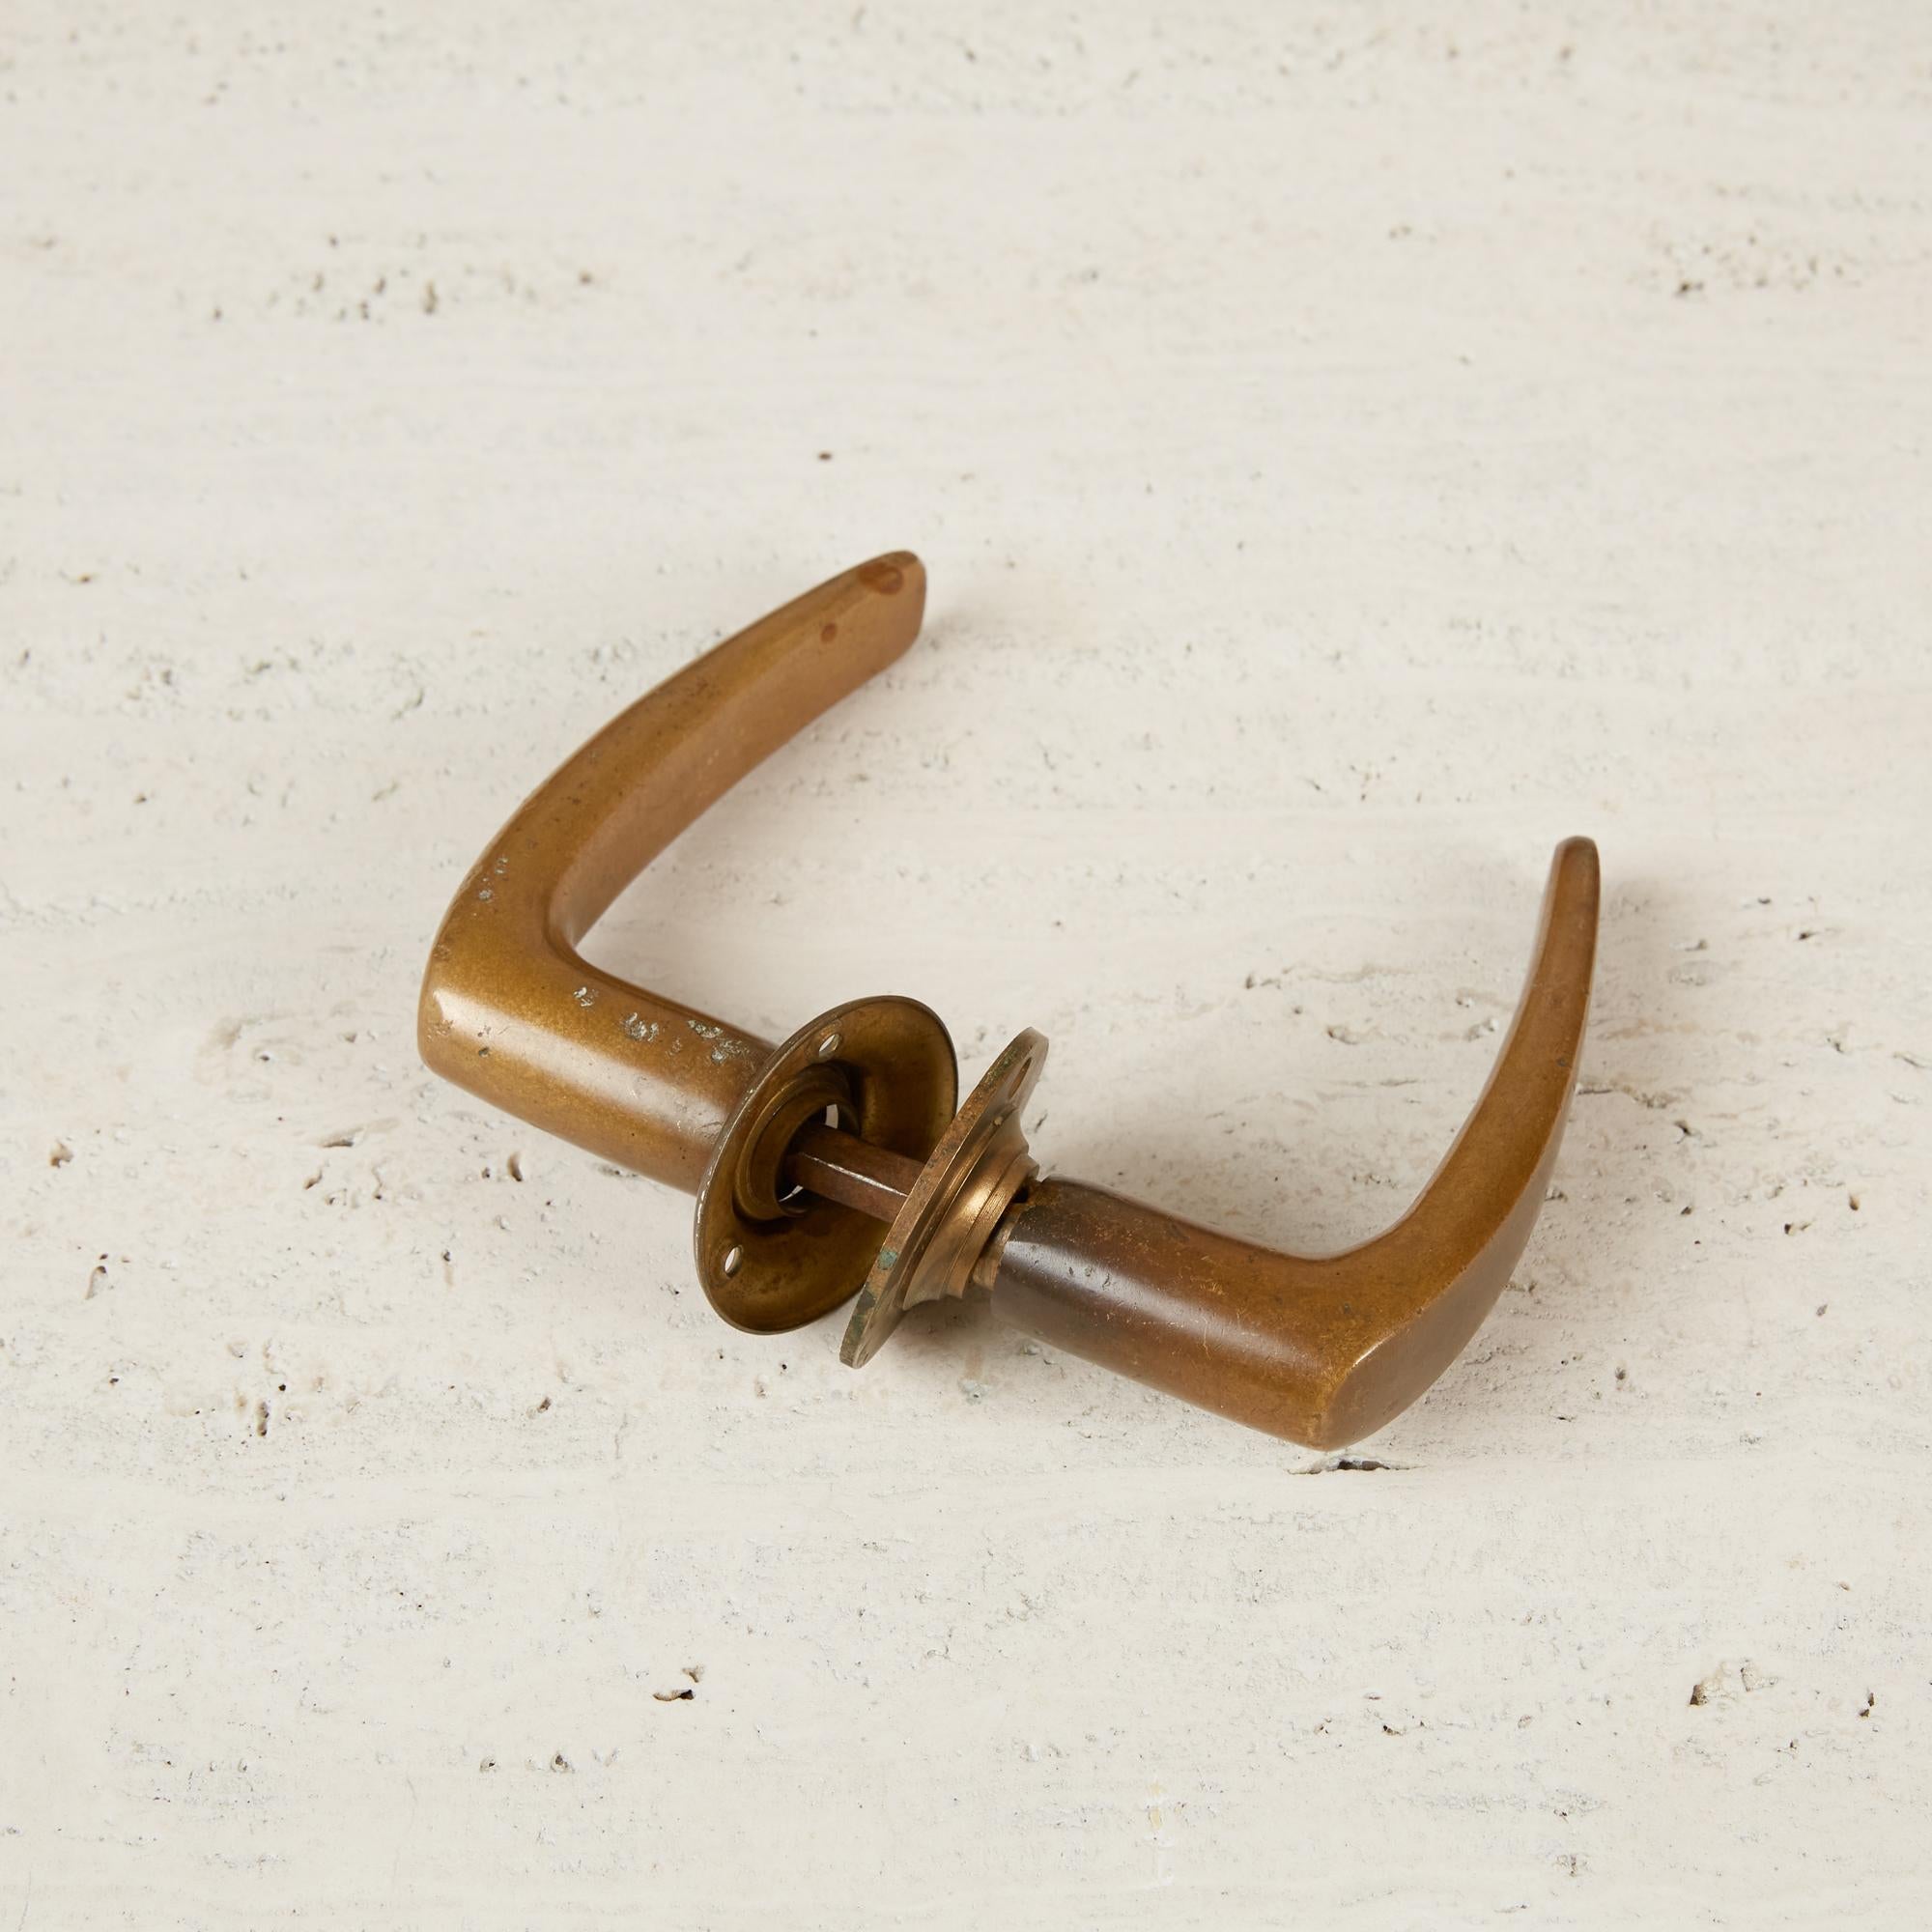 These weighty Alvar Aalto style solid bronze door handles with matching mounting plates make you feel like you’re entering a space with purpose. With minor patination, these still retain a lot of their original golden color, and are cold and